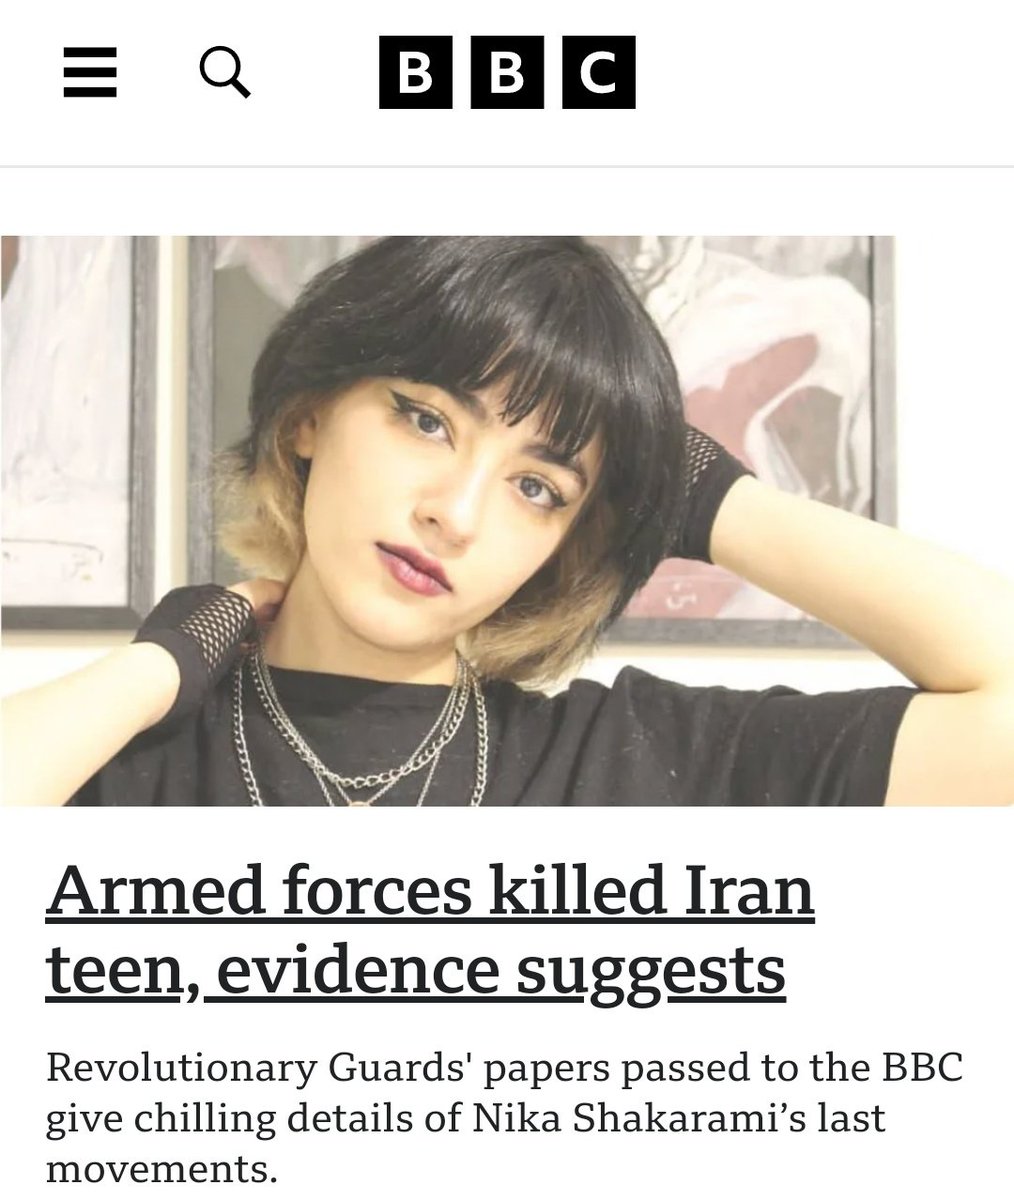 FAKE NEWS to shift attention from the #GazaGenocide and violence against US student protests. No stamp, no date, strange style, wrong classification and font, etc. It contradicts their old narrative of her death. Those who know Iranian bureaucracy see a poorly made photoshop.